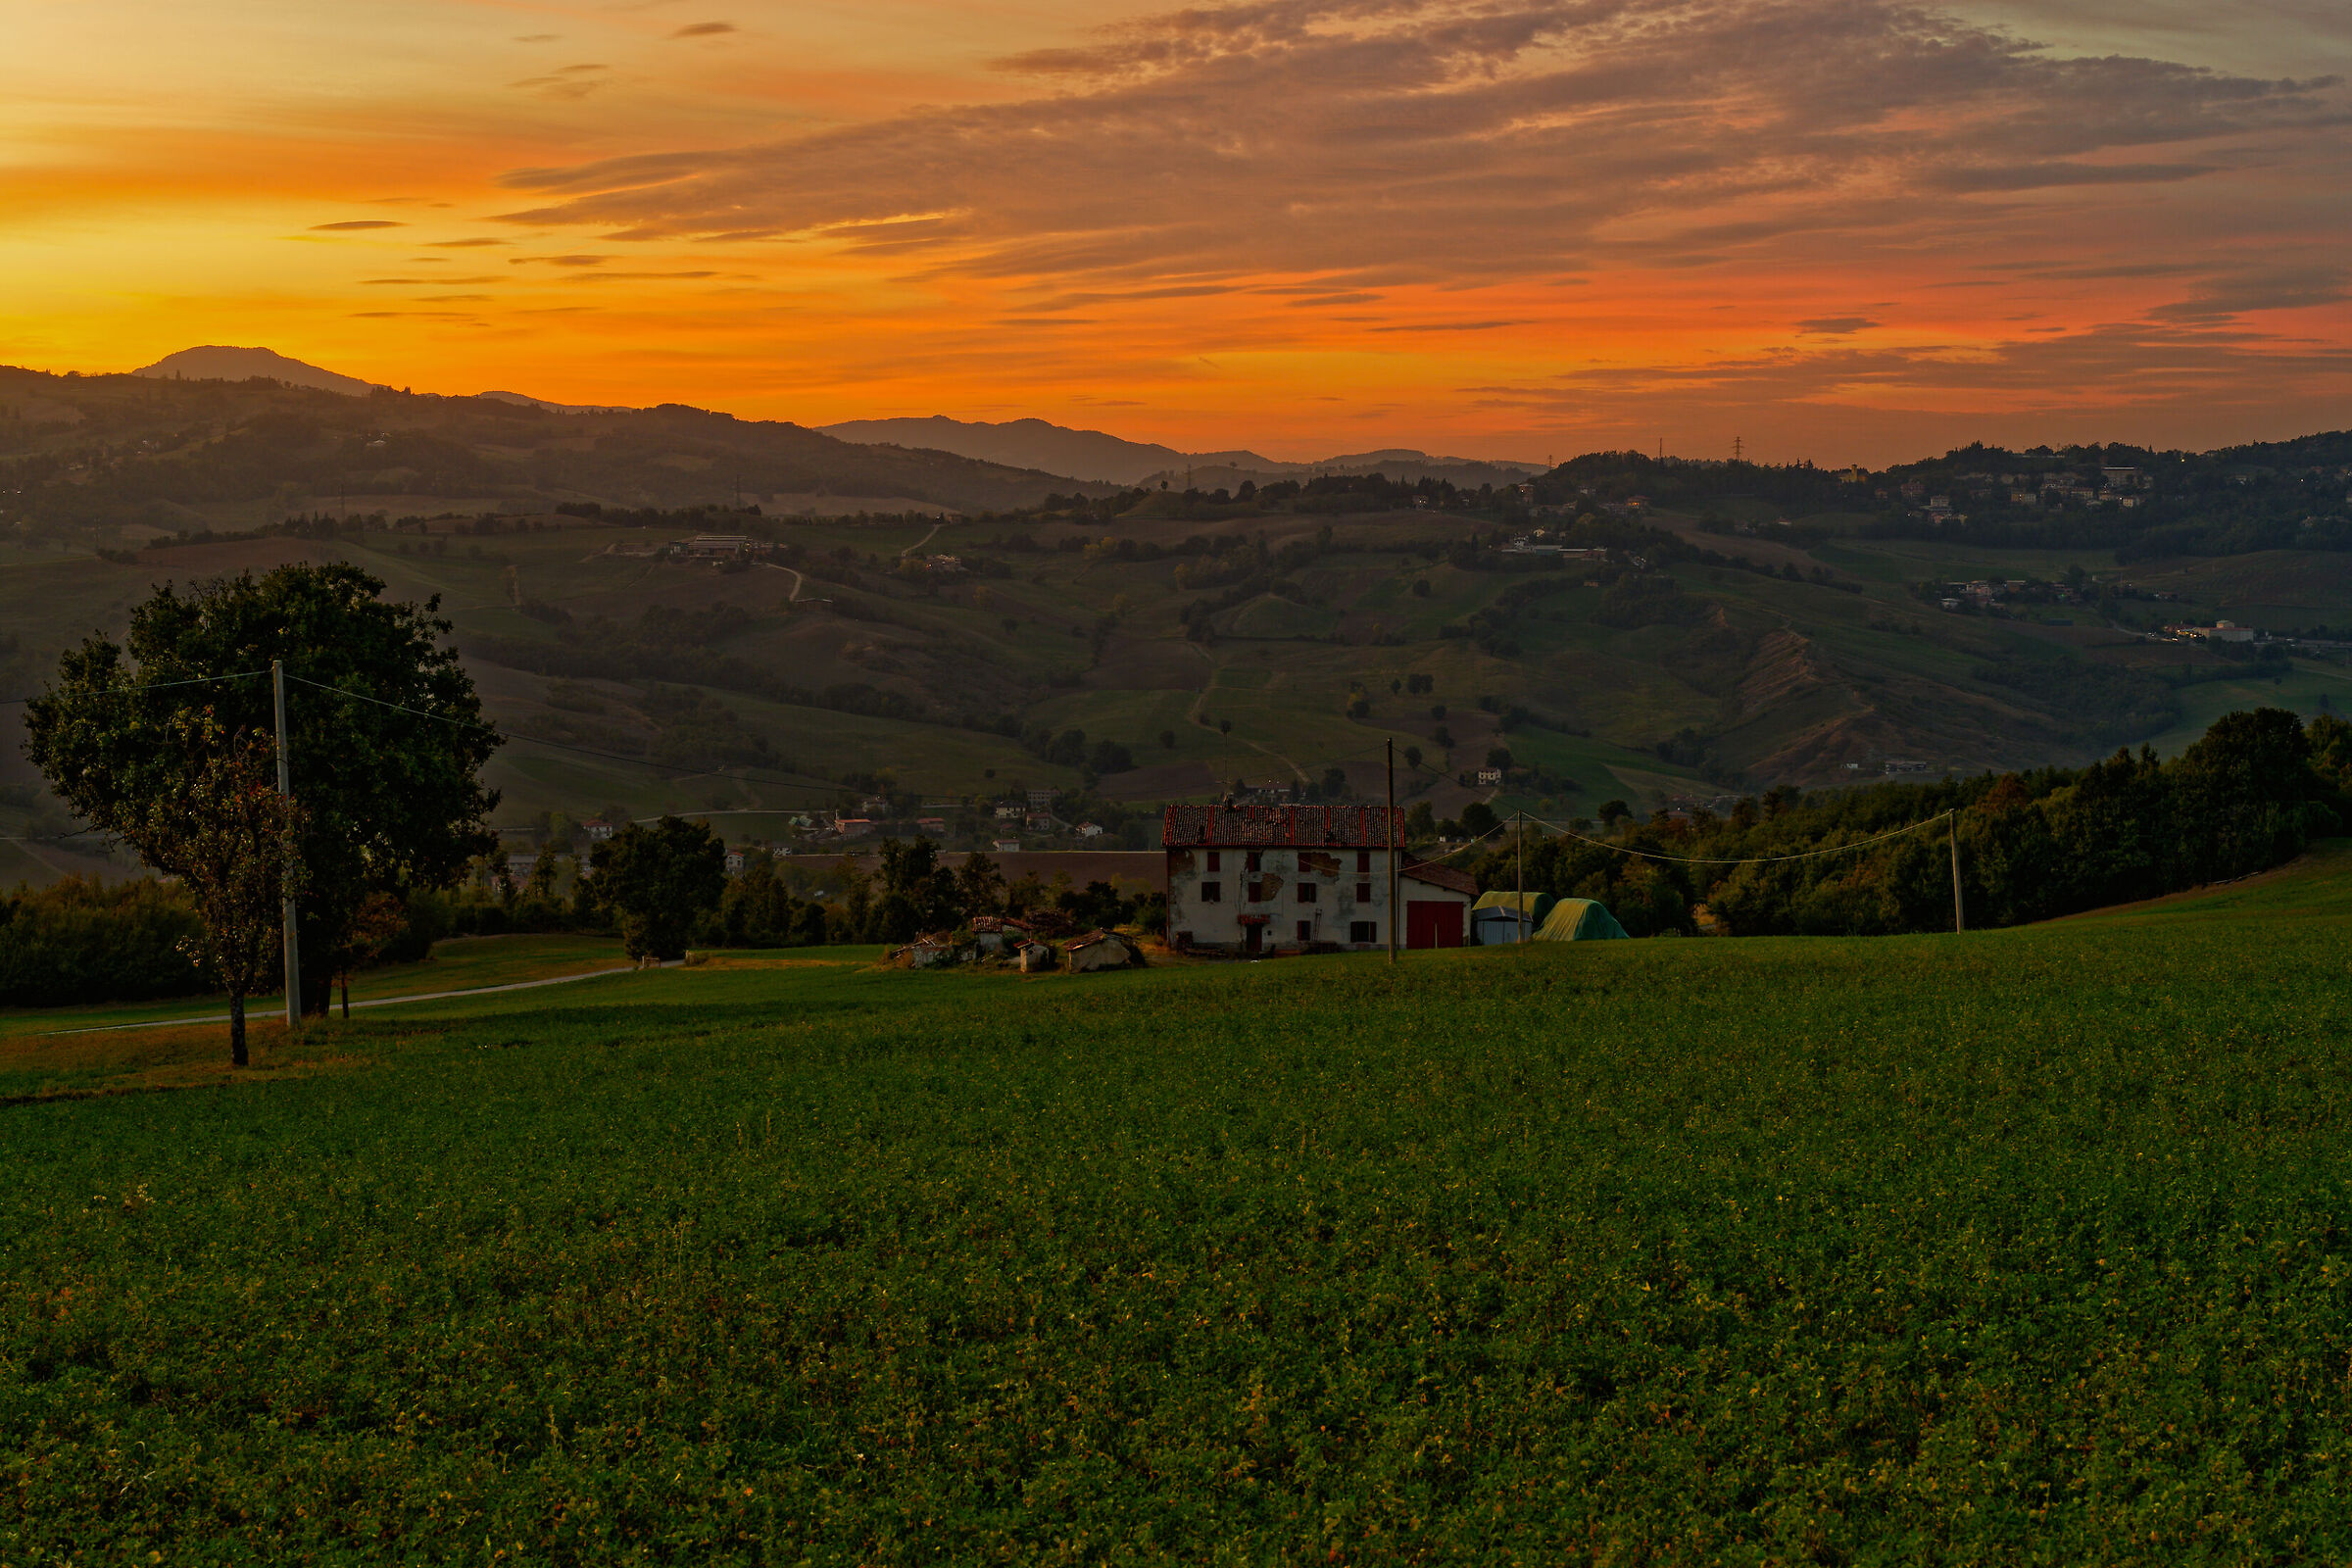 Sunset over the Parma Apennines...